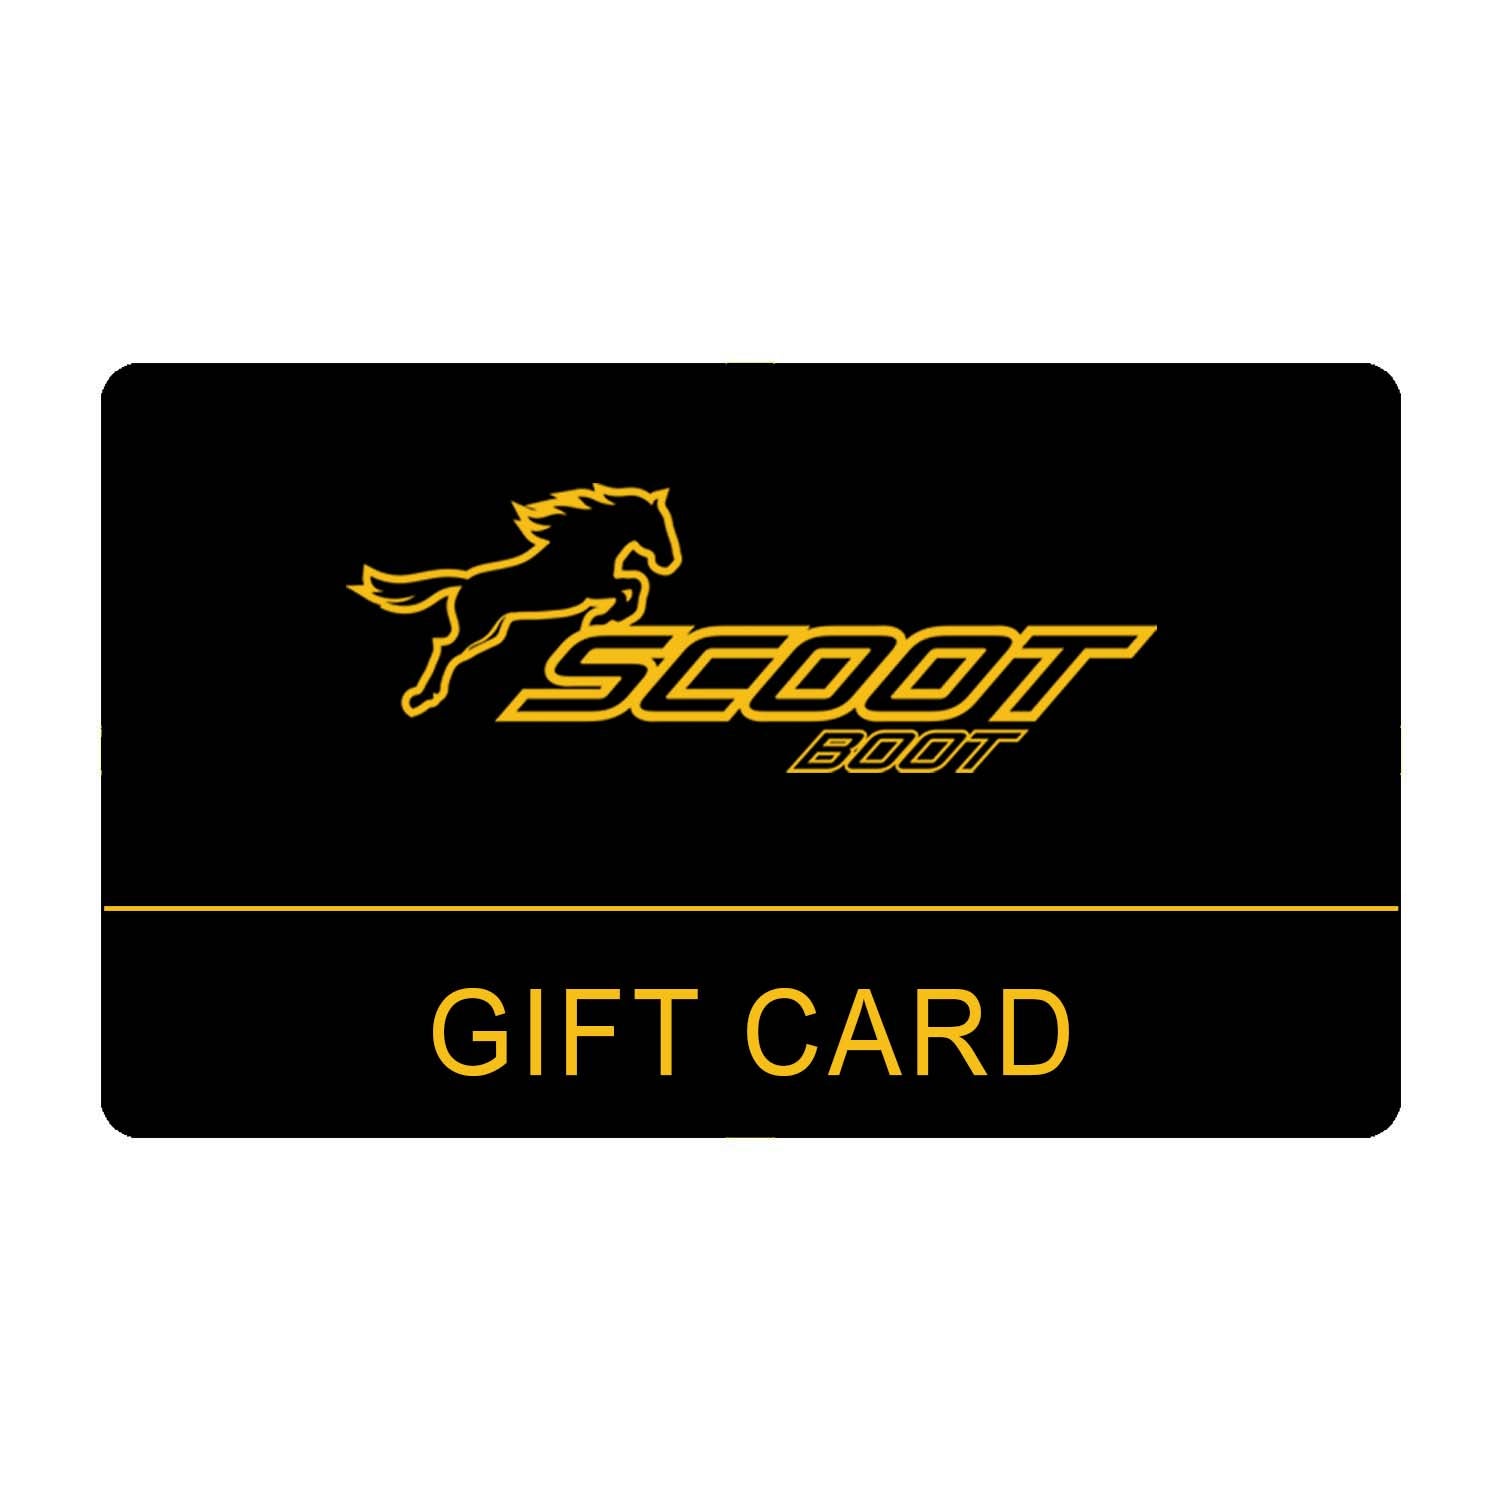 Scoot Boots gift cards & vouchers - Hoof Boots USA